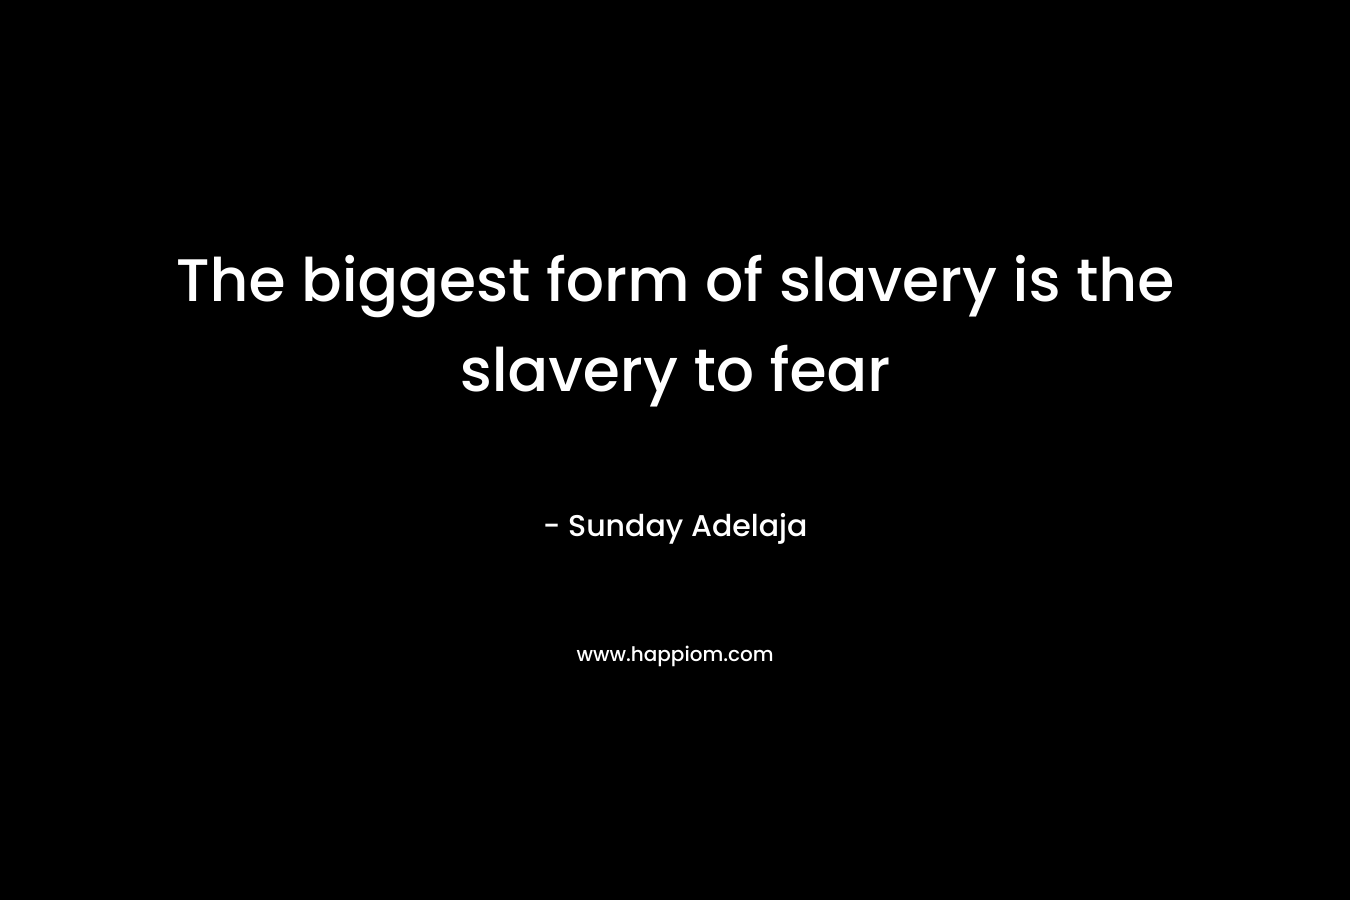 The biggest form of slavery is the slavery to fear